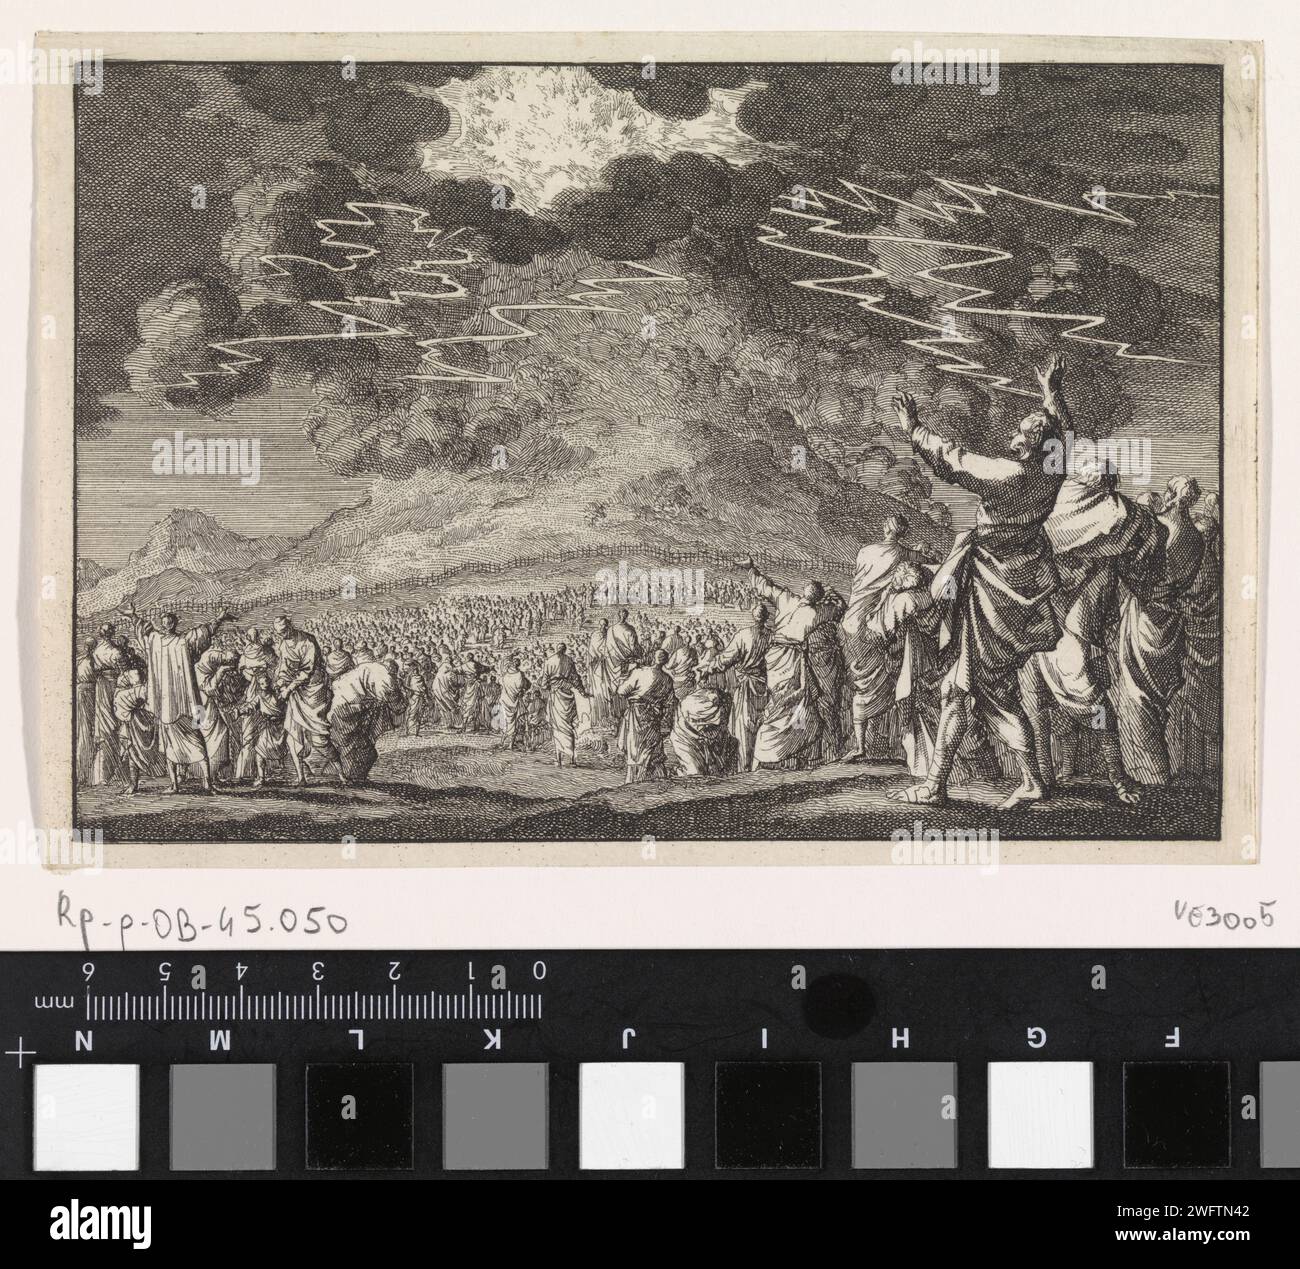 Moses on Mount Sinai, Jan Luyken, 1703 print  Print Maker: Haarlem Publisher: Amsterdam paper etching Mount Sinai is covered by a thick cloud, thunder and lightning Stock Photo